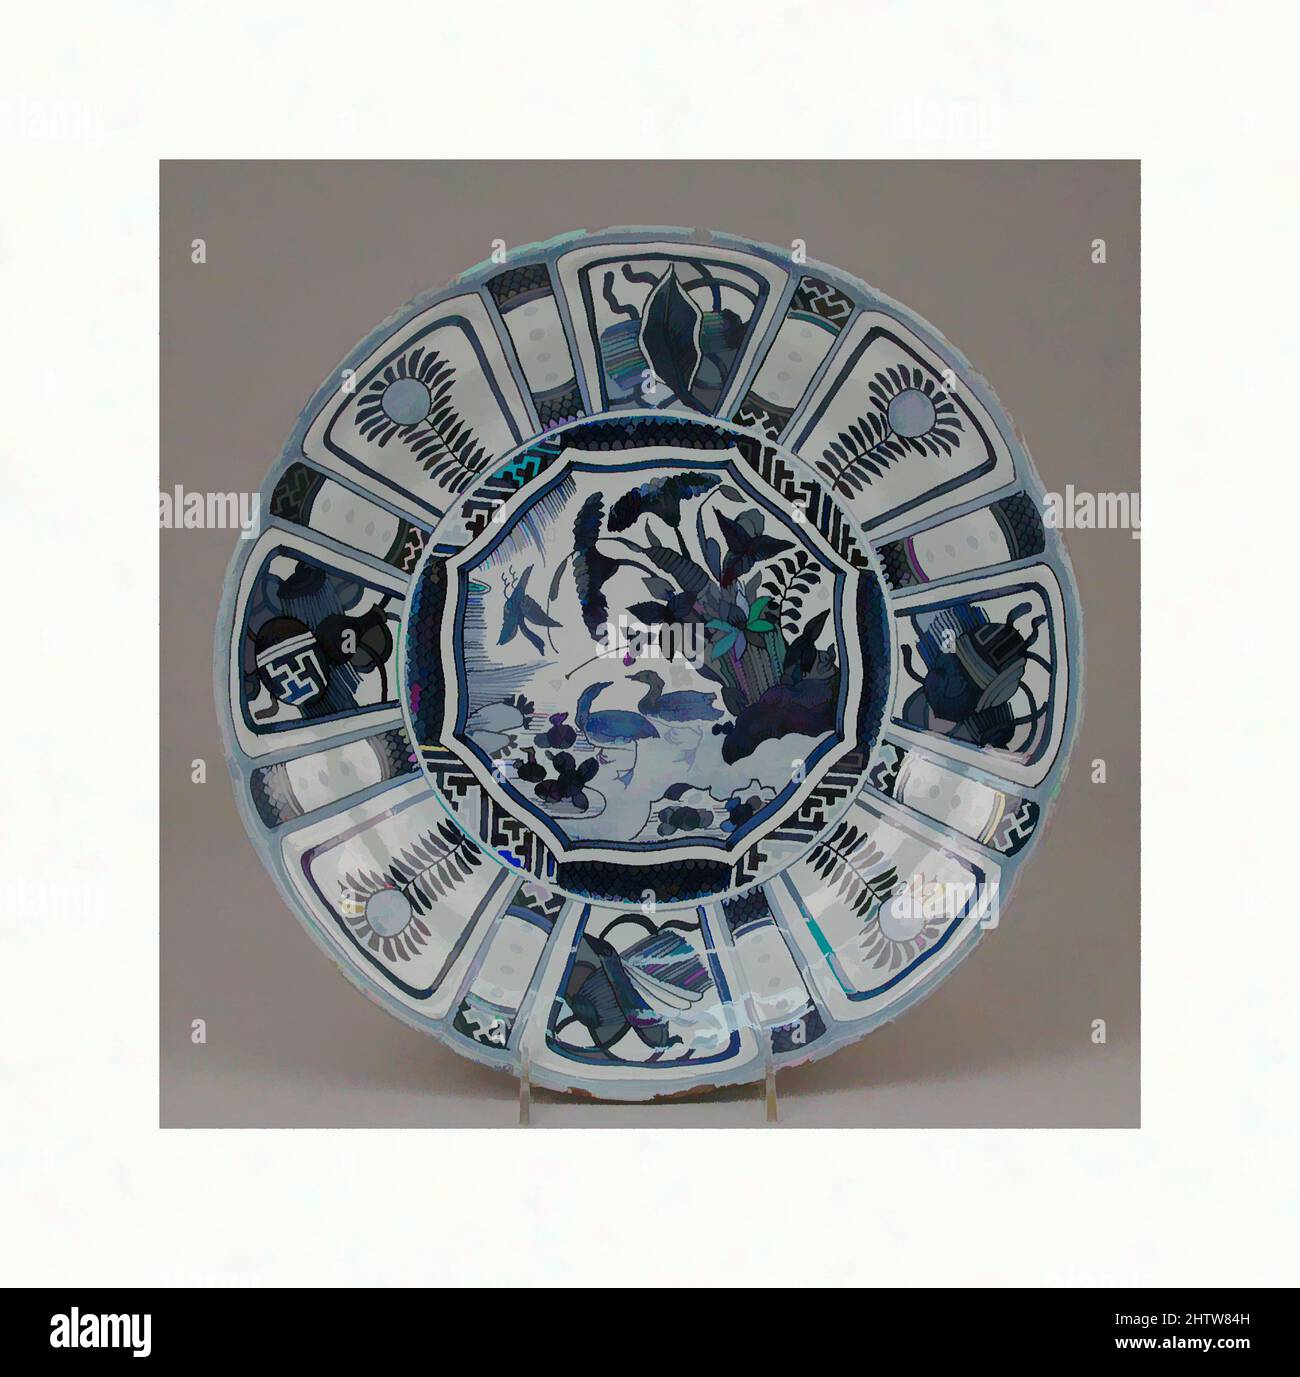 Art inspired by Dish, ca. 1700–1730, Dutch, Delft, Tin-glazed earthenware, Diameter: 13 3/8 in. (34 cm), Ceramics-Pottery, Classic works modernized by Artotop with a splash of modernity. Shapes, color and value, eye-catching visual impact on art. Emotions through freedom of artworks in a contemporary way. A timeless message pursuing a wildly creative new direction. Artists turning to the digital medium and creating the Artotop NFT Stock Photo